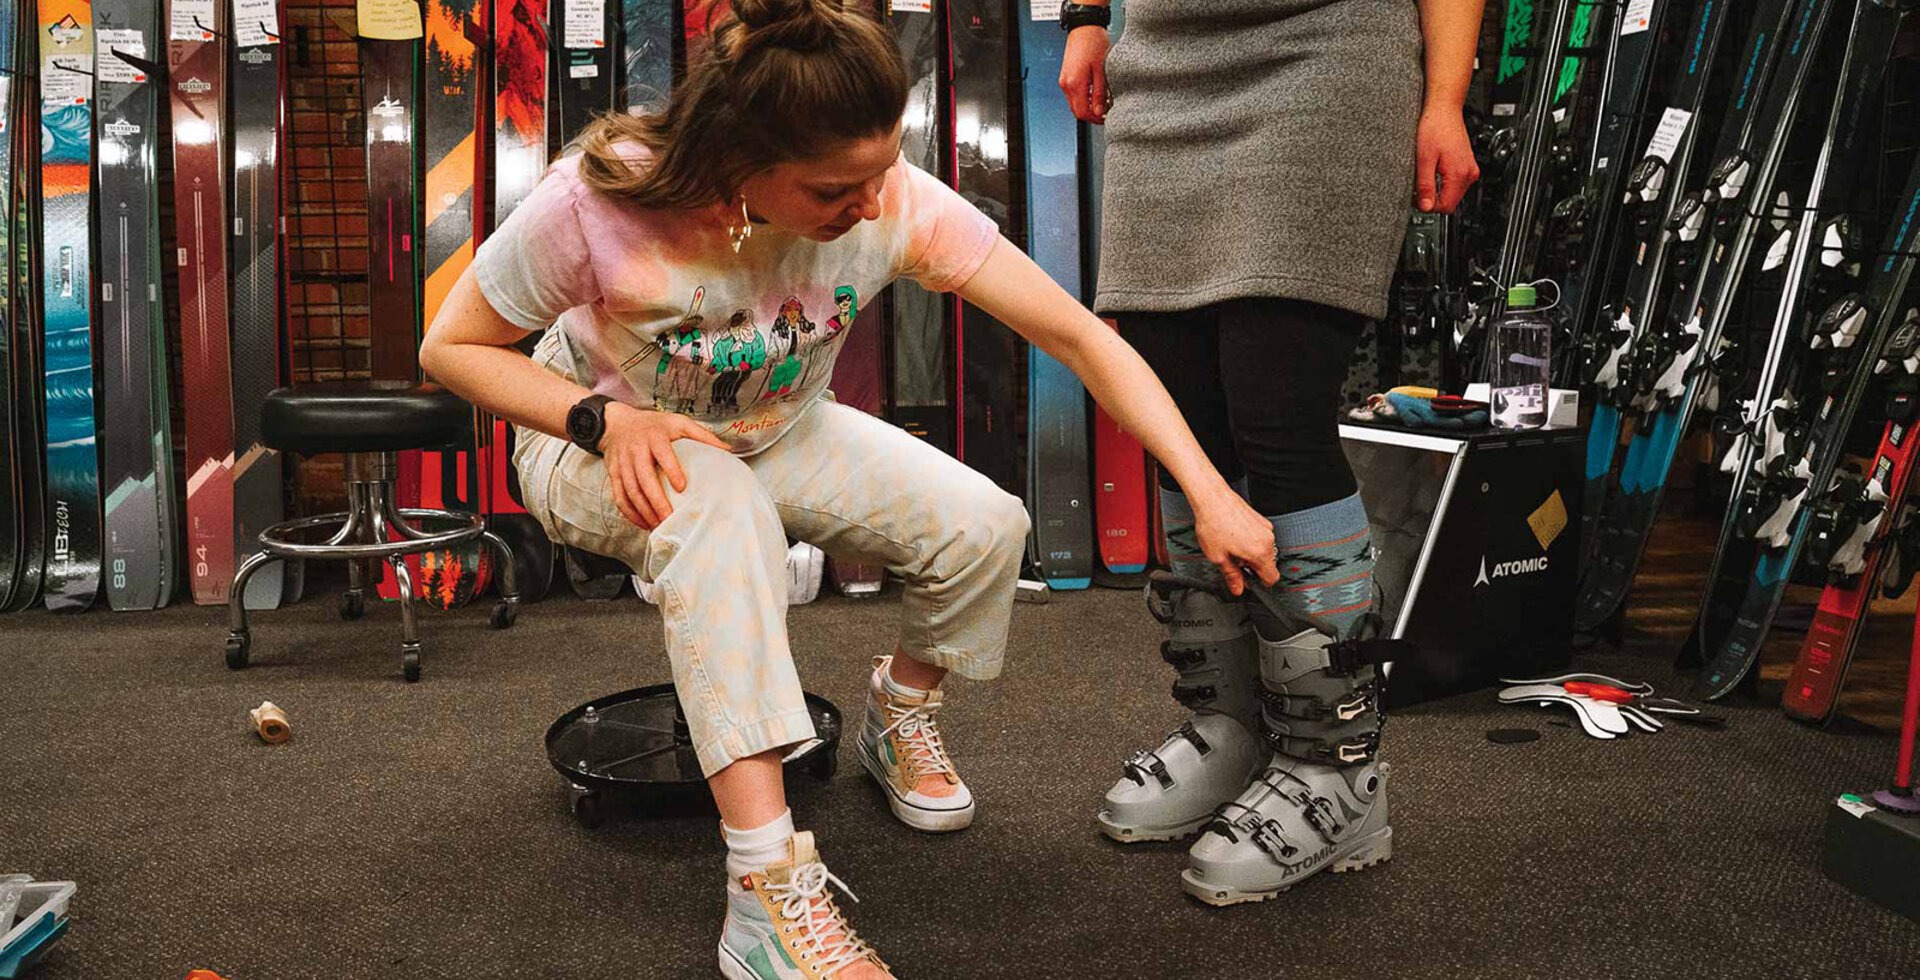 In the predominantly male-dominated skiing industry, Megan Jackson stands out as one of the few boot fitters specializing in women's ski boots. Her expertise allows her to quickly assess a person's feet, accurately deducing their past injuries and sports background.